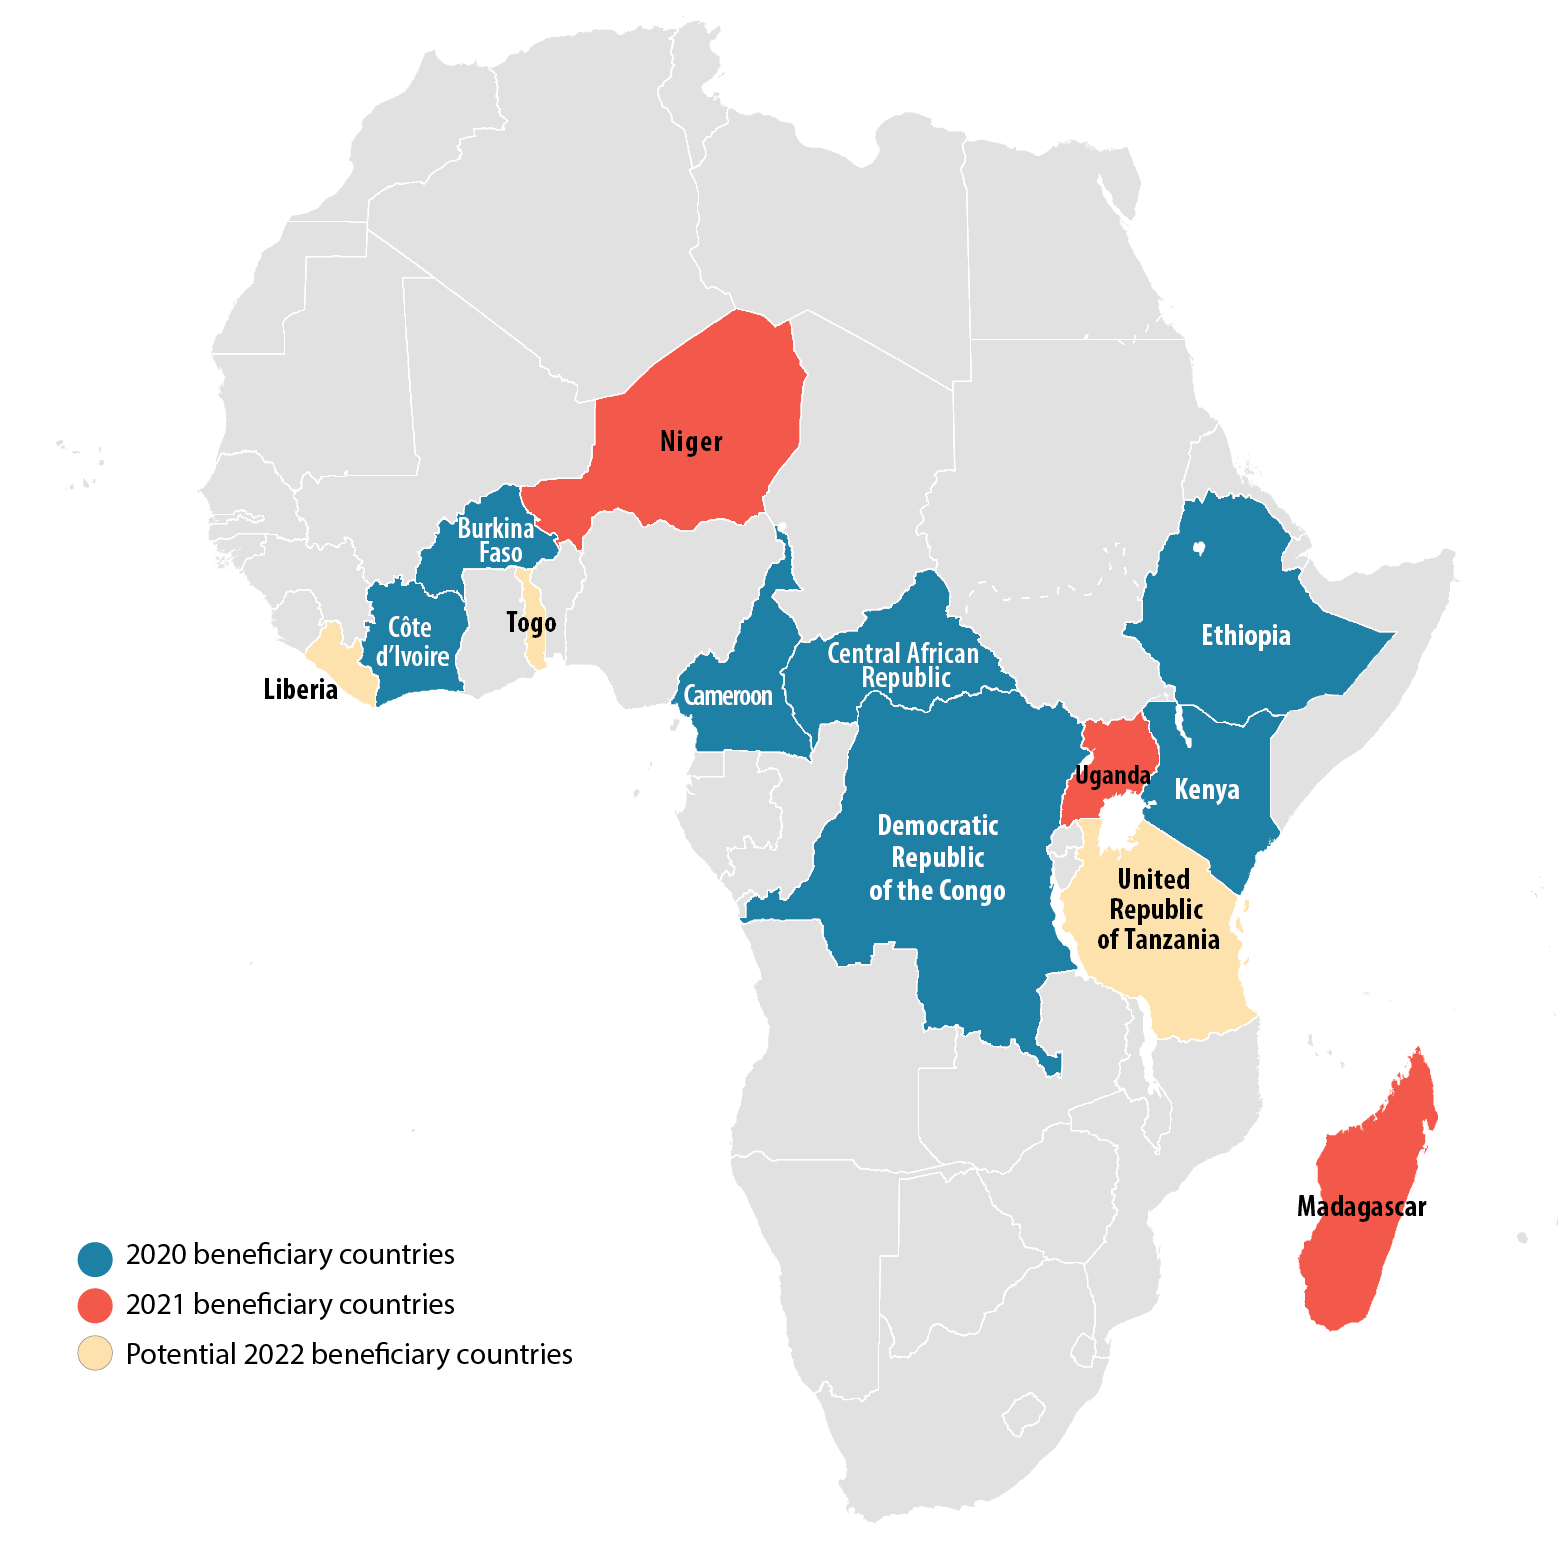 Map of Africa showing beneficiary countries from 2020 to 2021, as well as potential 2022 beneficiary countries